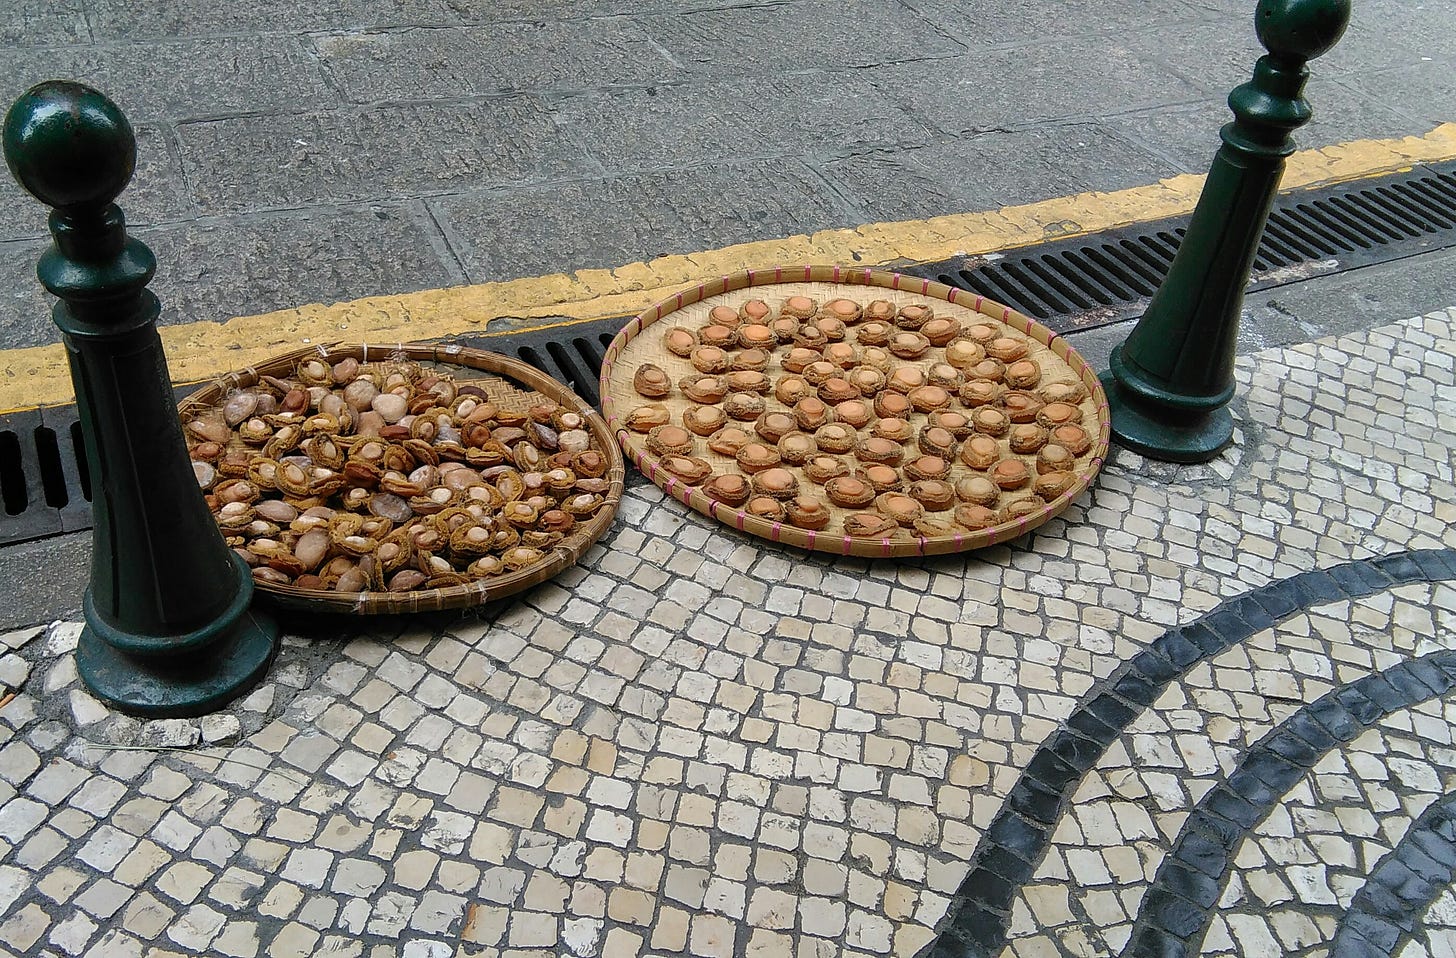 A shot of a pavement in Macau where abalone are drying on large round wicker baskets